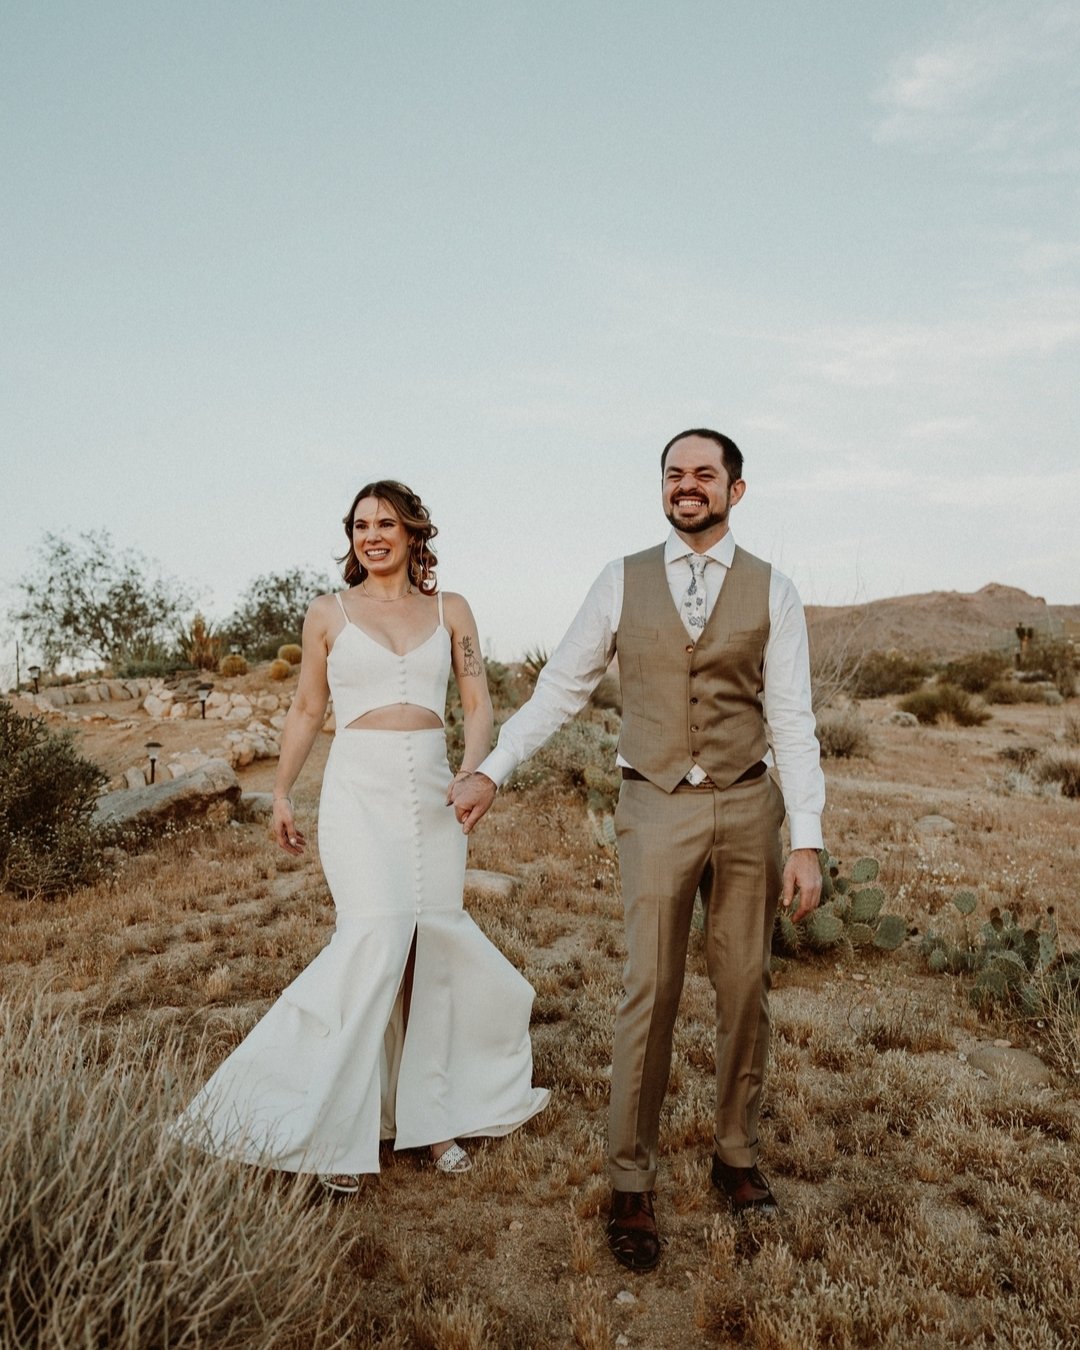 Happy one year anniversary to Kate and Fred!
&bull;⁠ The Creative Team &bull;⁠
Beautiful Couple: Kate + Fred
Kate's Attire: @aandbe_seattle
Fred&rsquo;s Attire: @knotstandard
Venue: @sacredsandsjoshuatree
Florist: @nightgardenfloral
Planner: @emberan